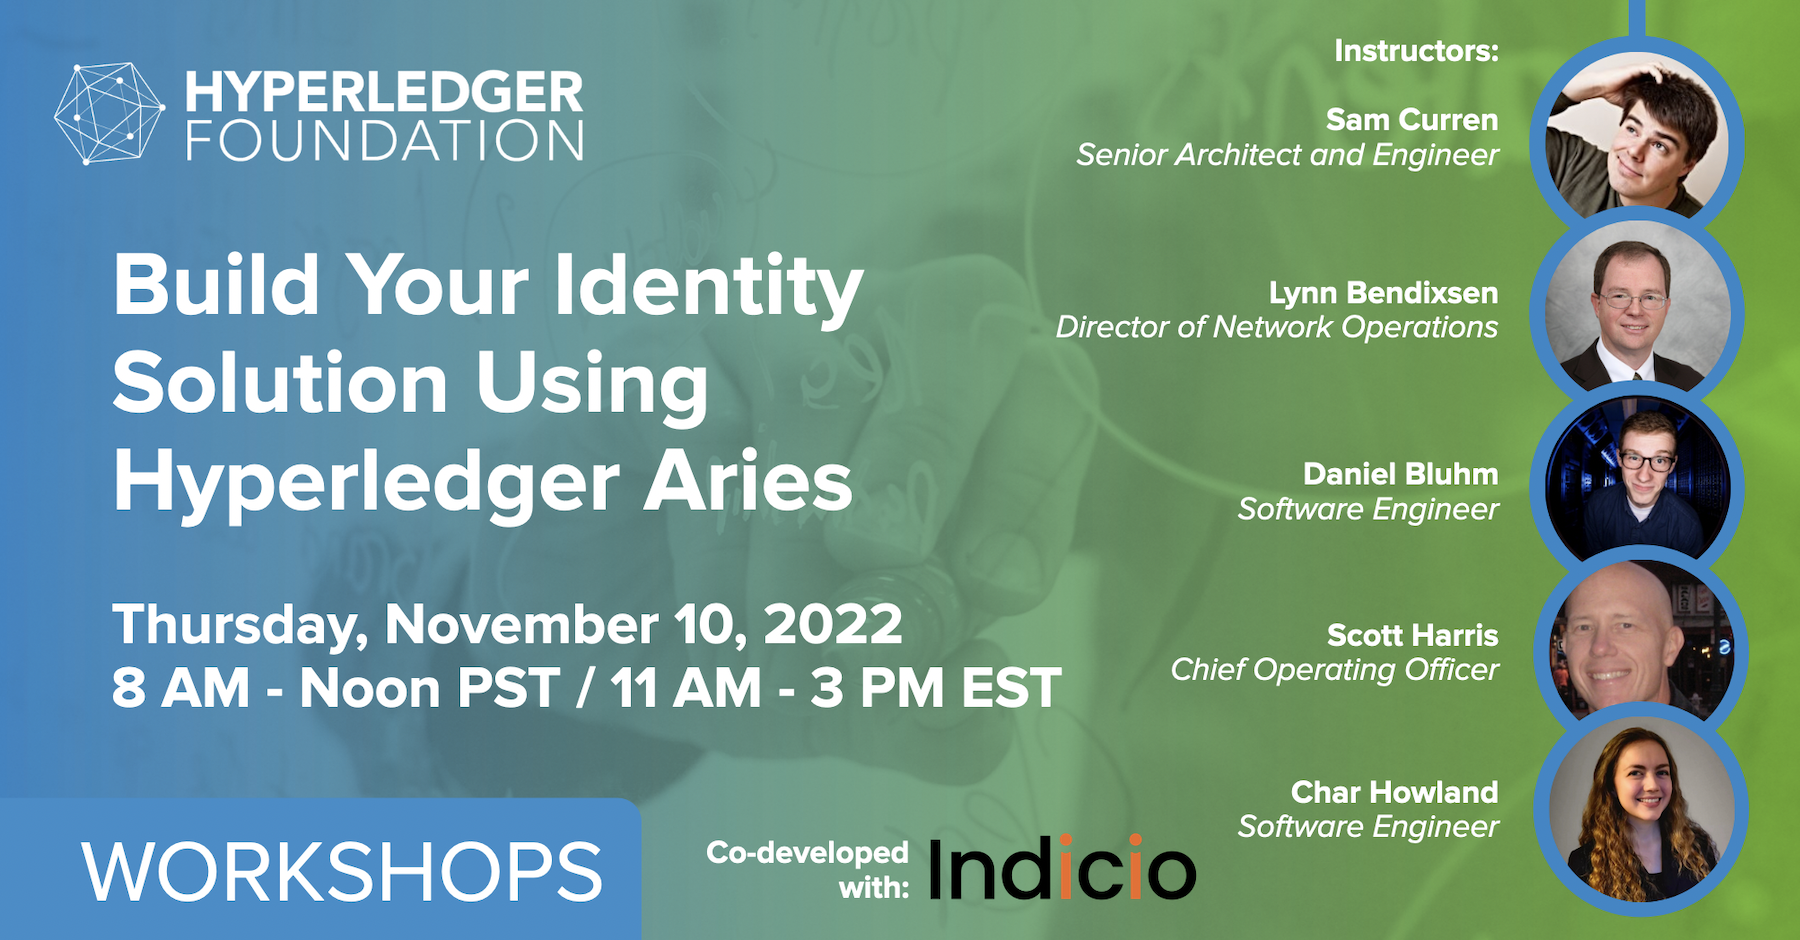 Build Your Identity Solution Using Hyperledger Aries Workshop featured image